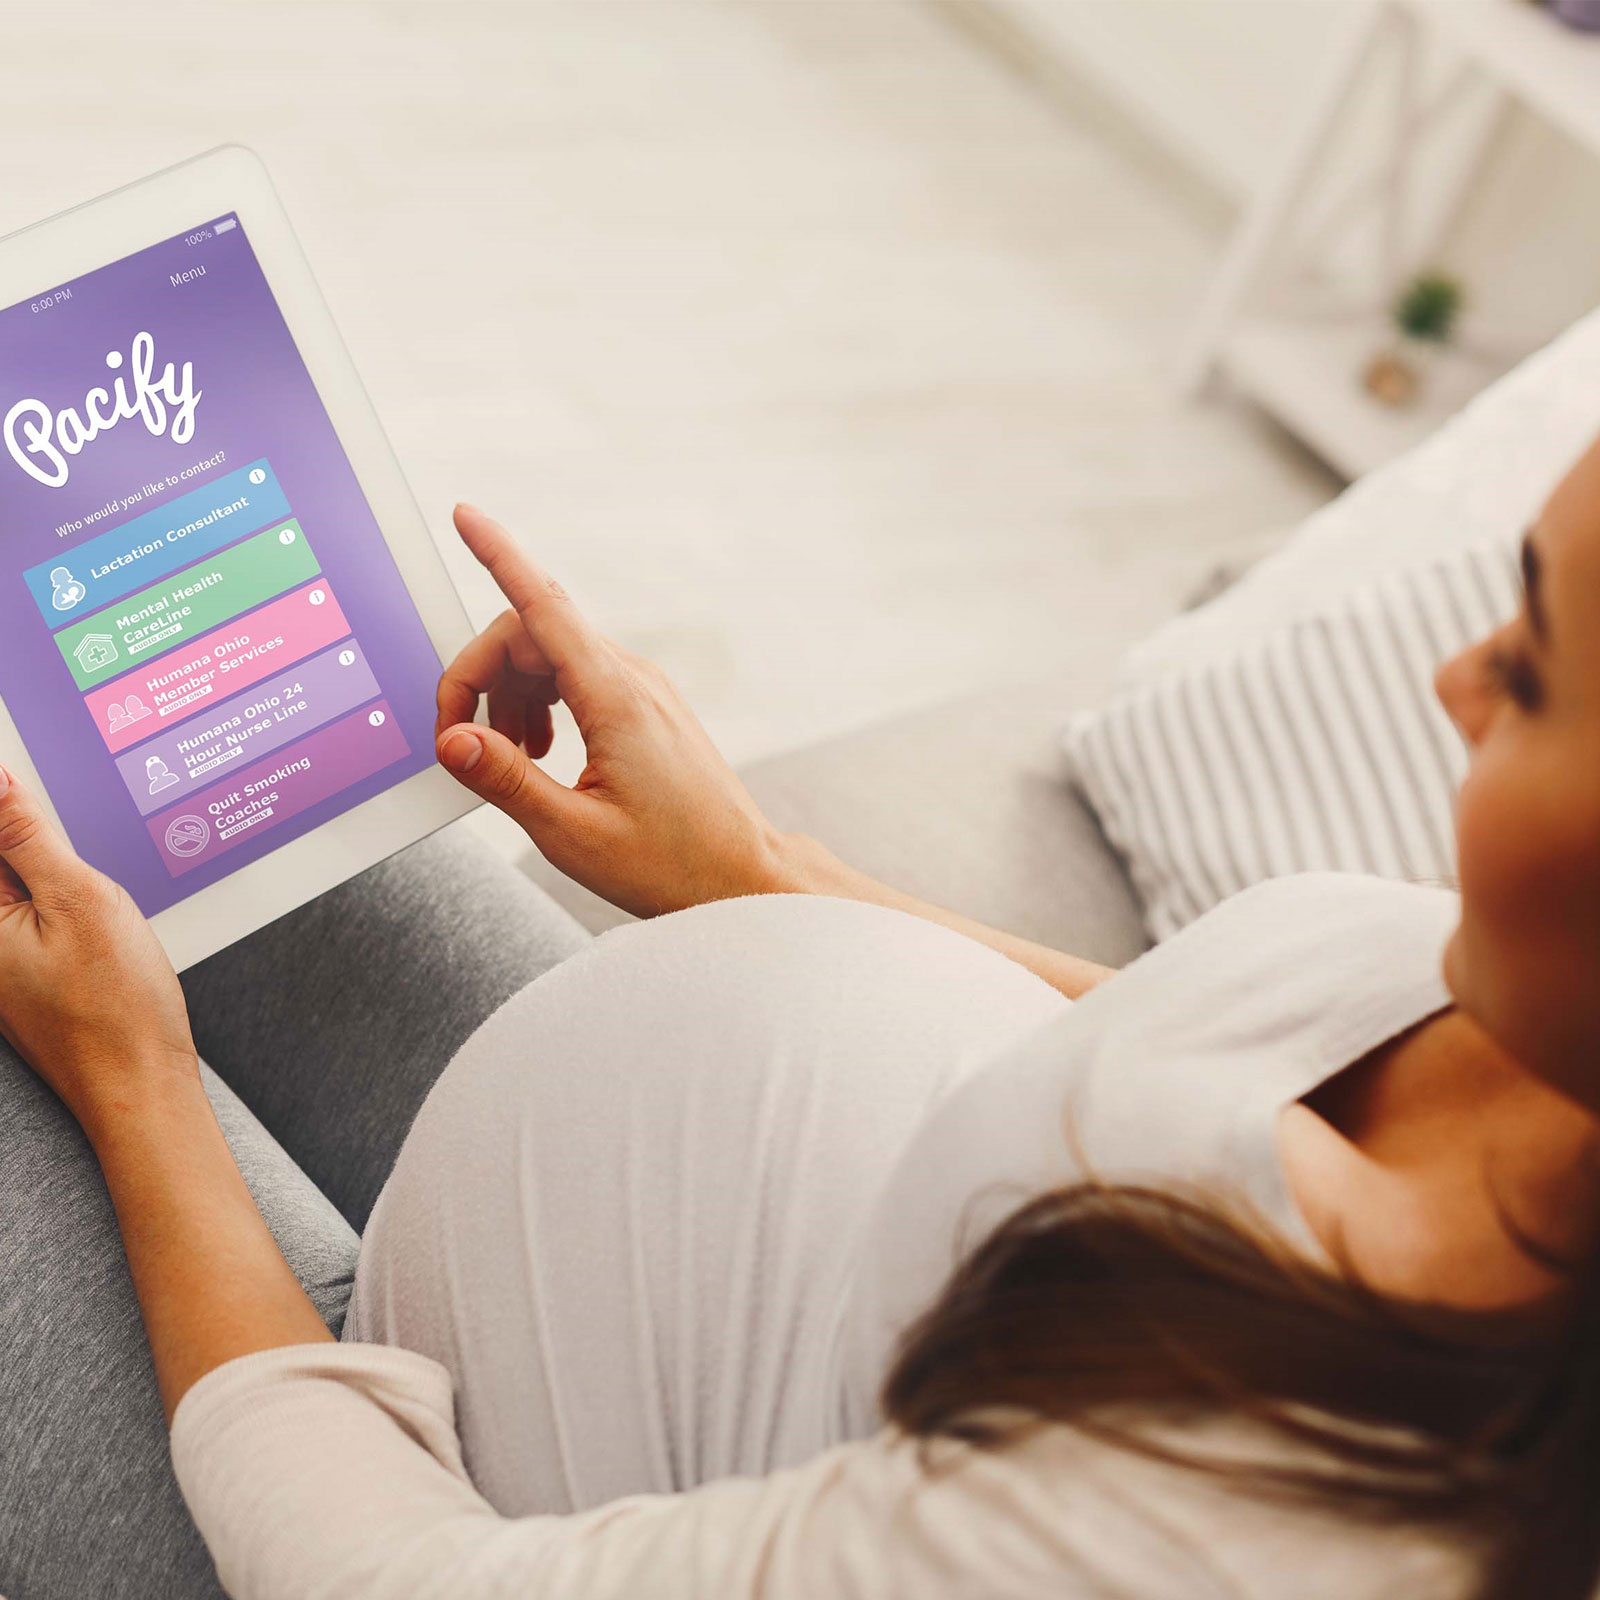 Pregnant member uses the Pacify app on her tablet